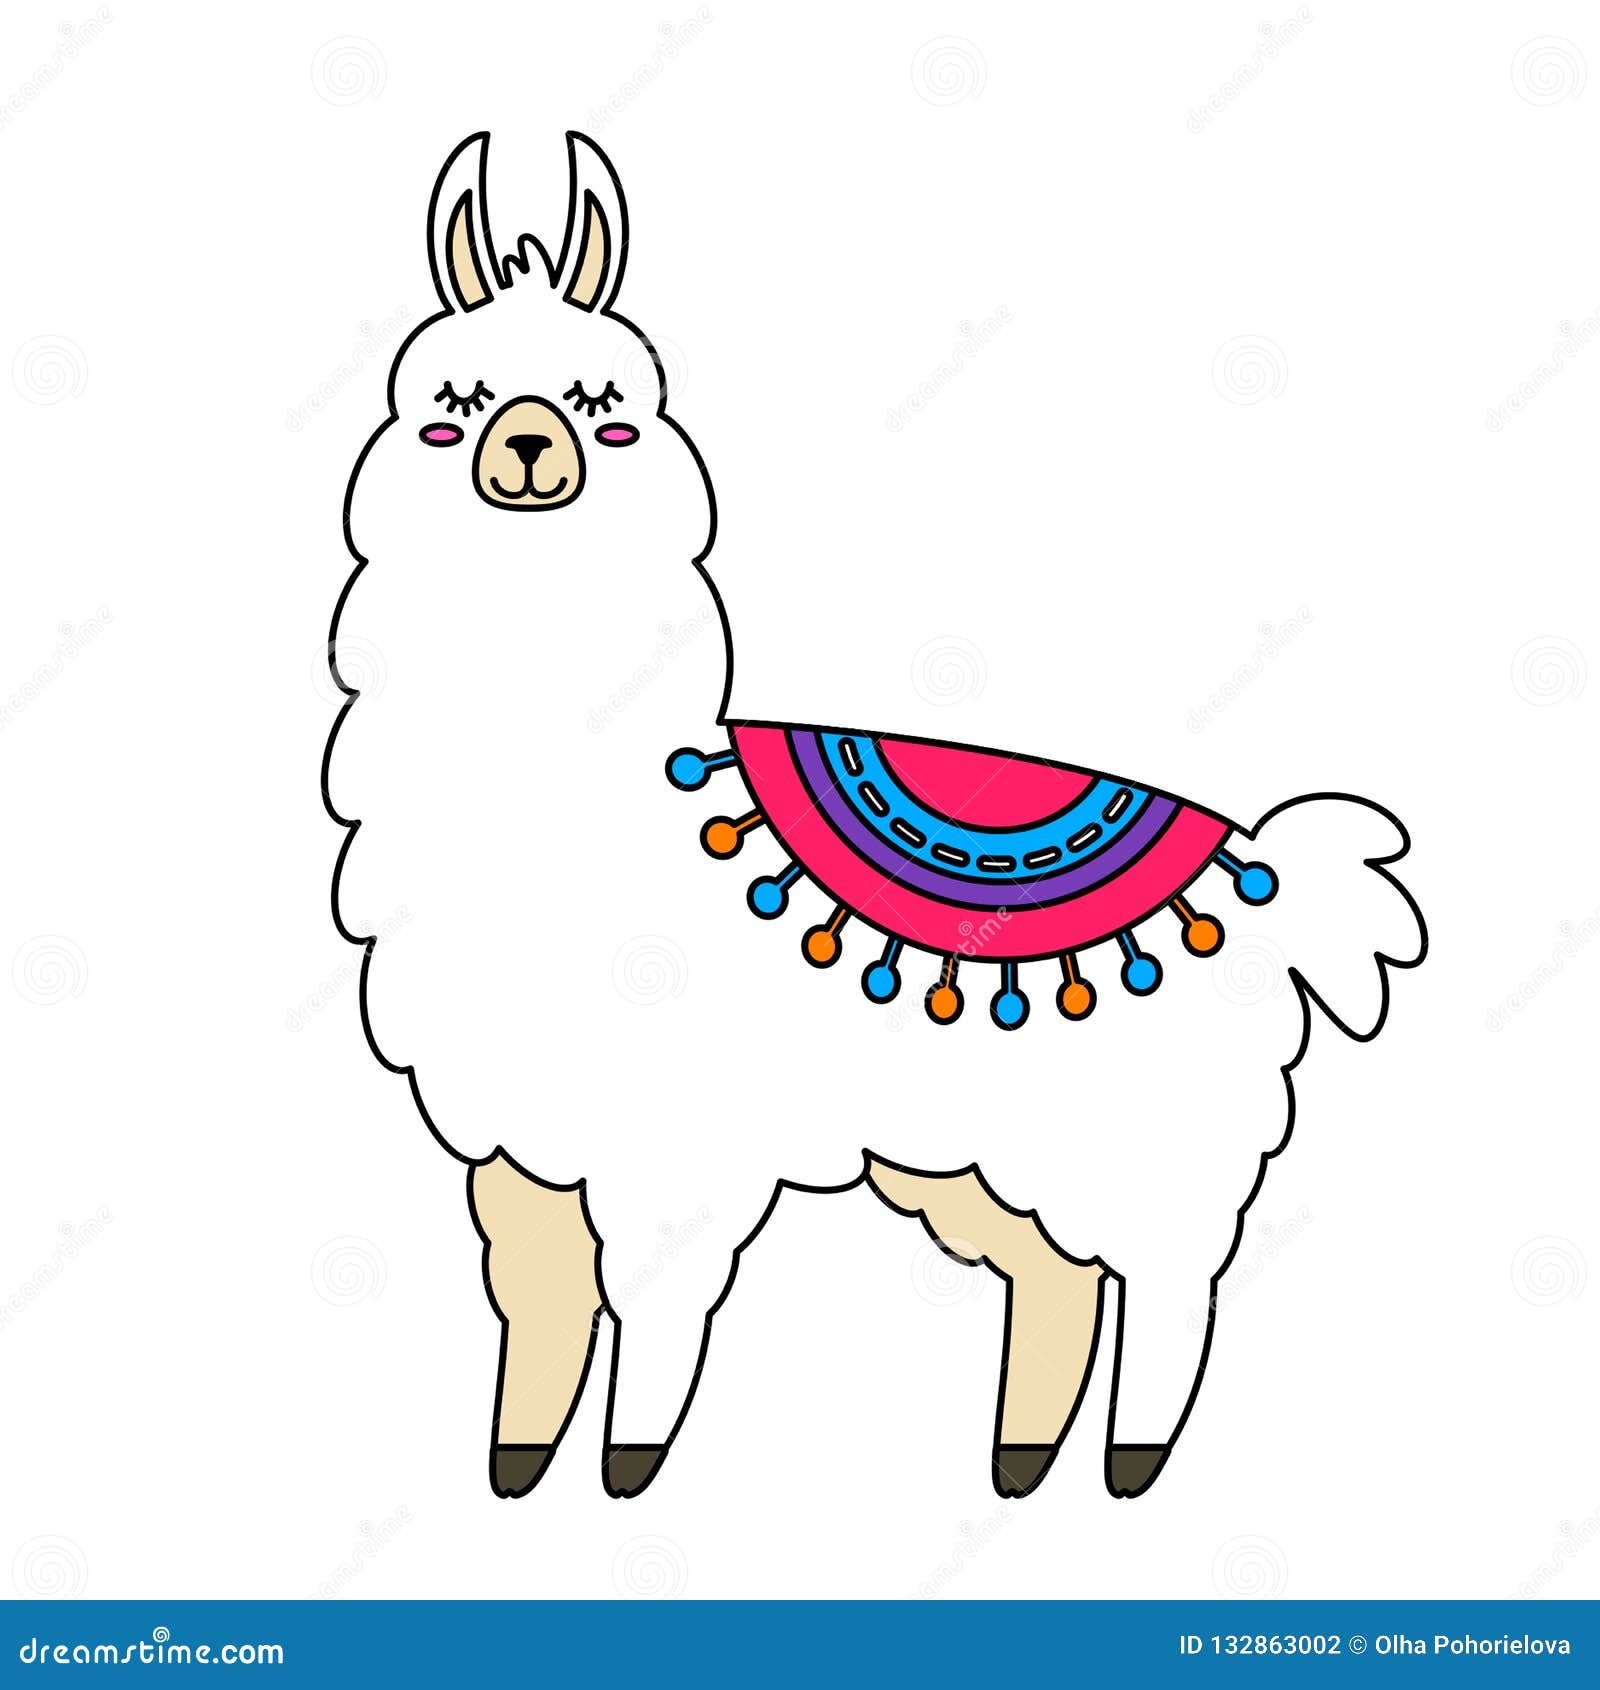 Funny Llama Alpaca With Cacti Template For Printing On Textiles T Shirt Vector Illustration Isolated In Cartoon Style Stock Illustration Illustration Of Greeting Cactus 132863002